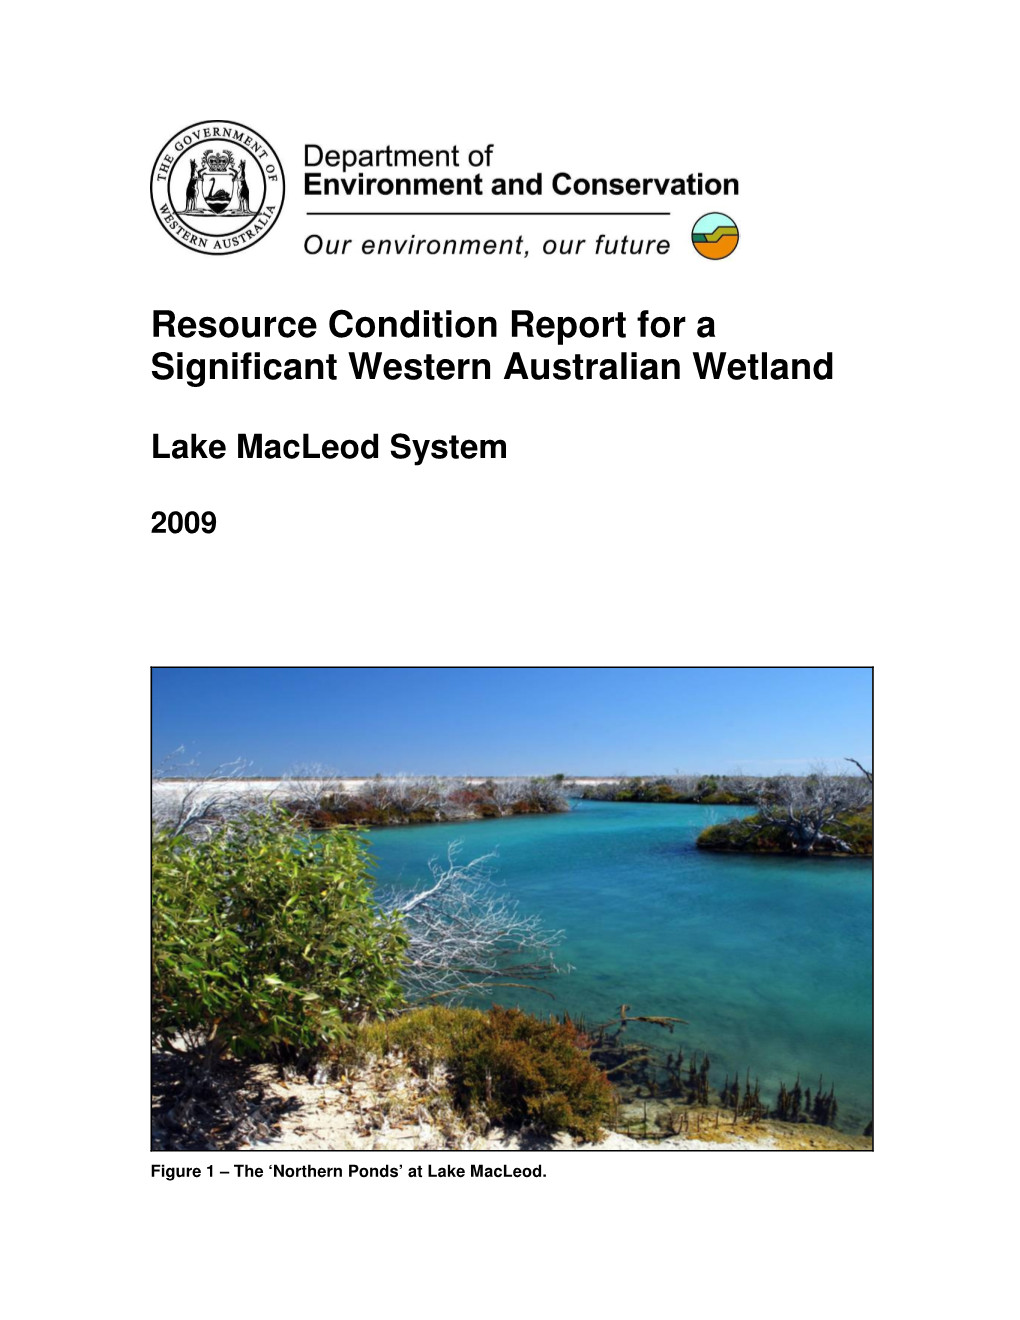 Resource Condition Report for a Significant Western Australian Wetland